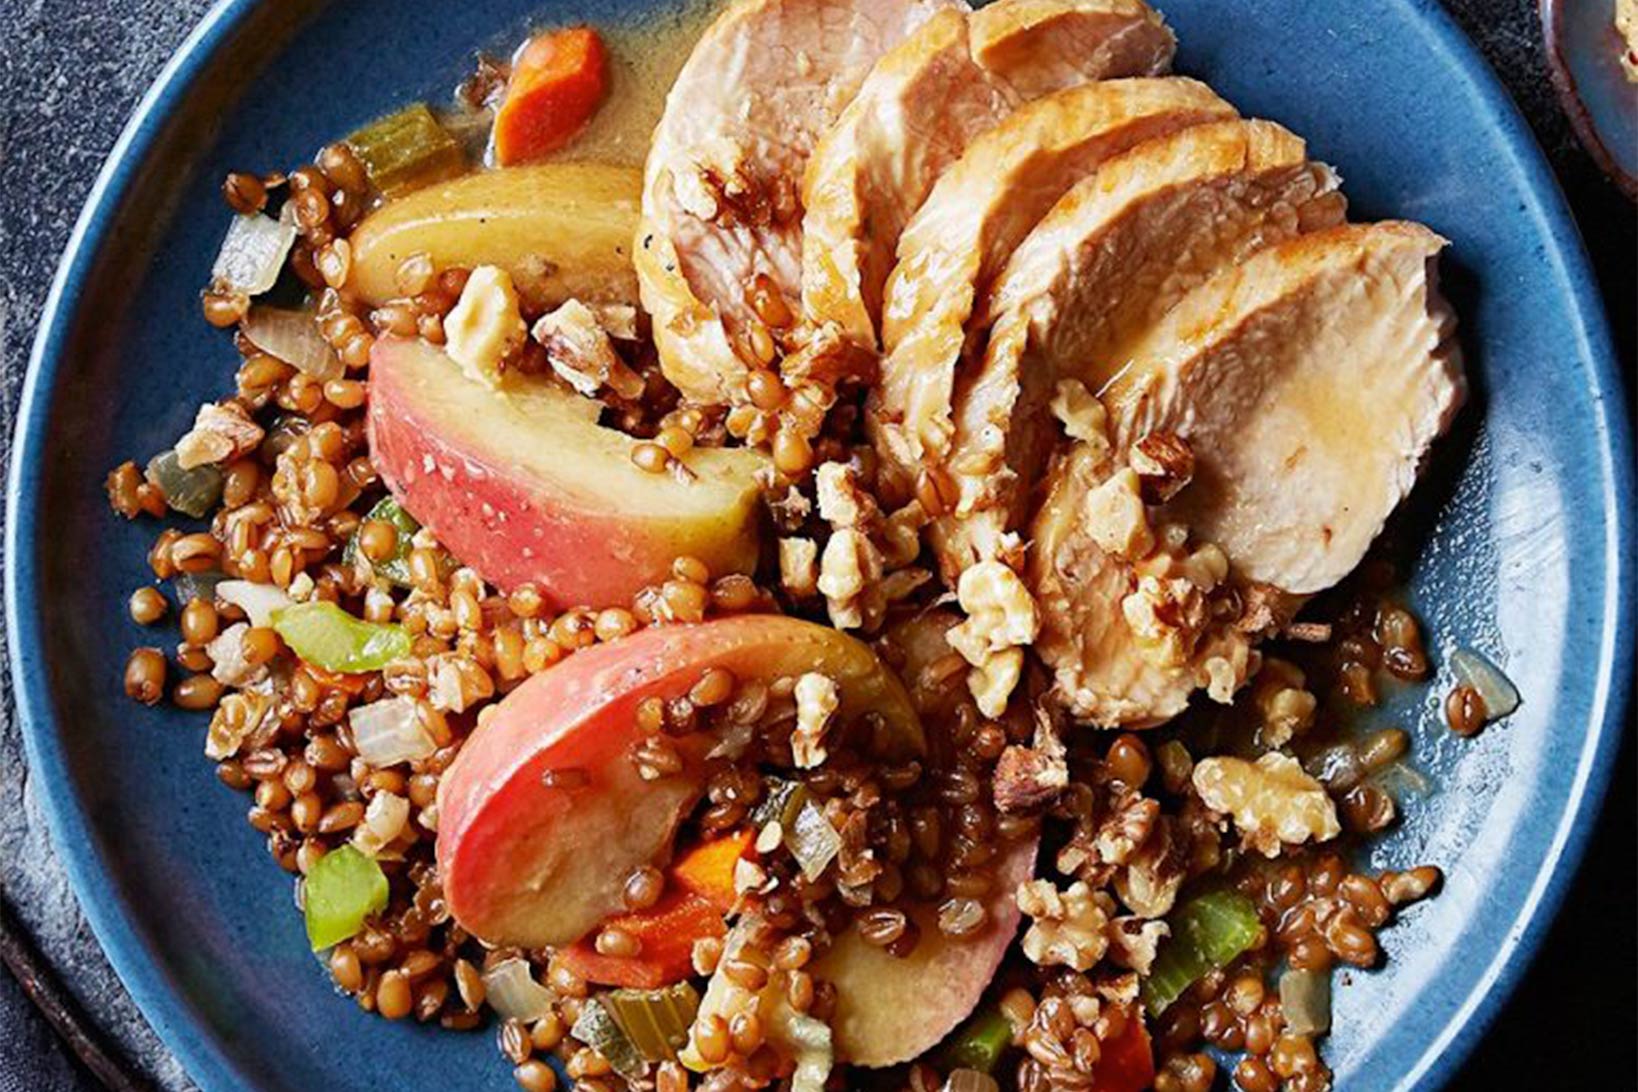 An apple salad with whole grains and walnuts on a blue plate.